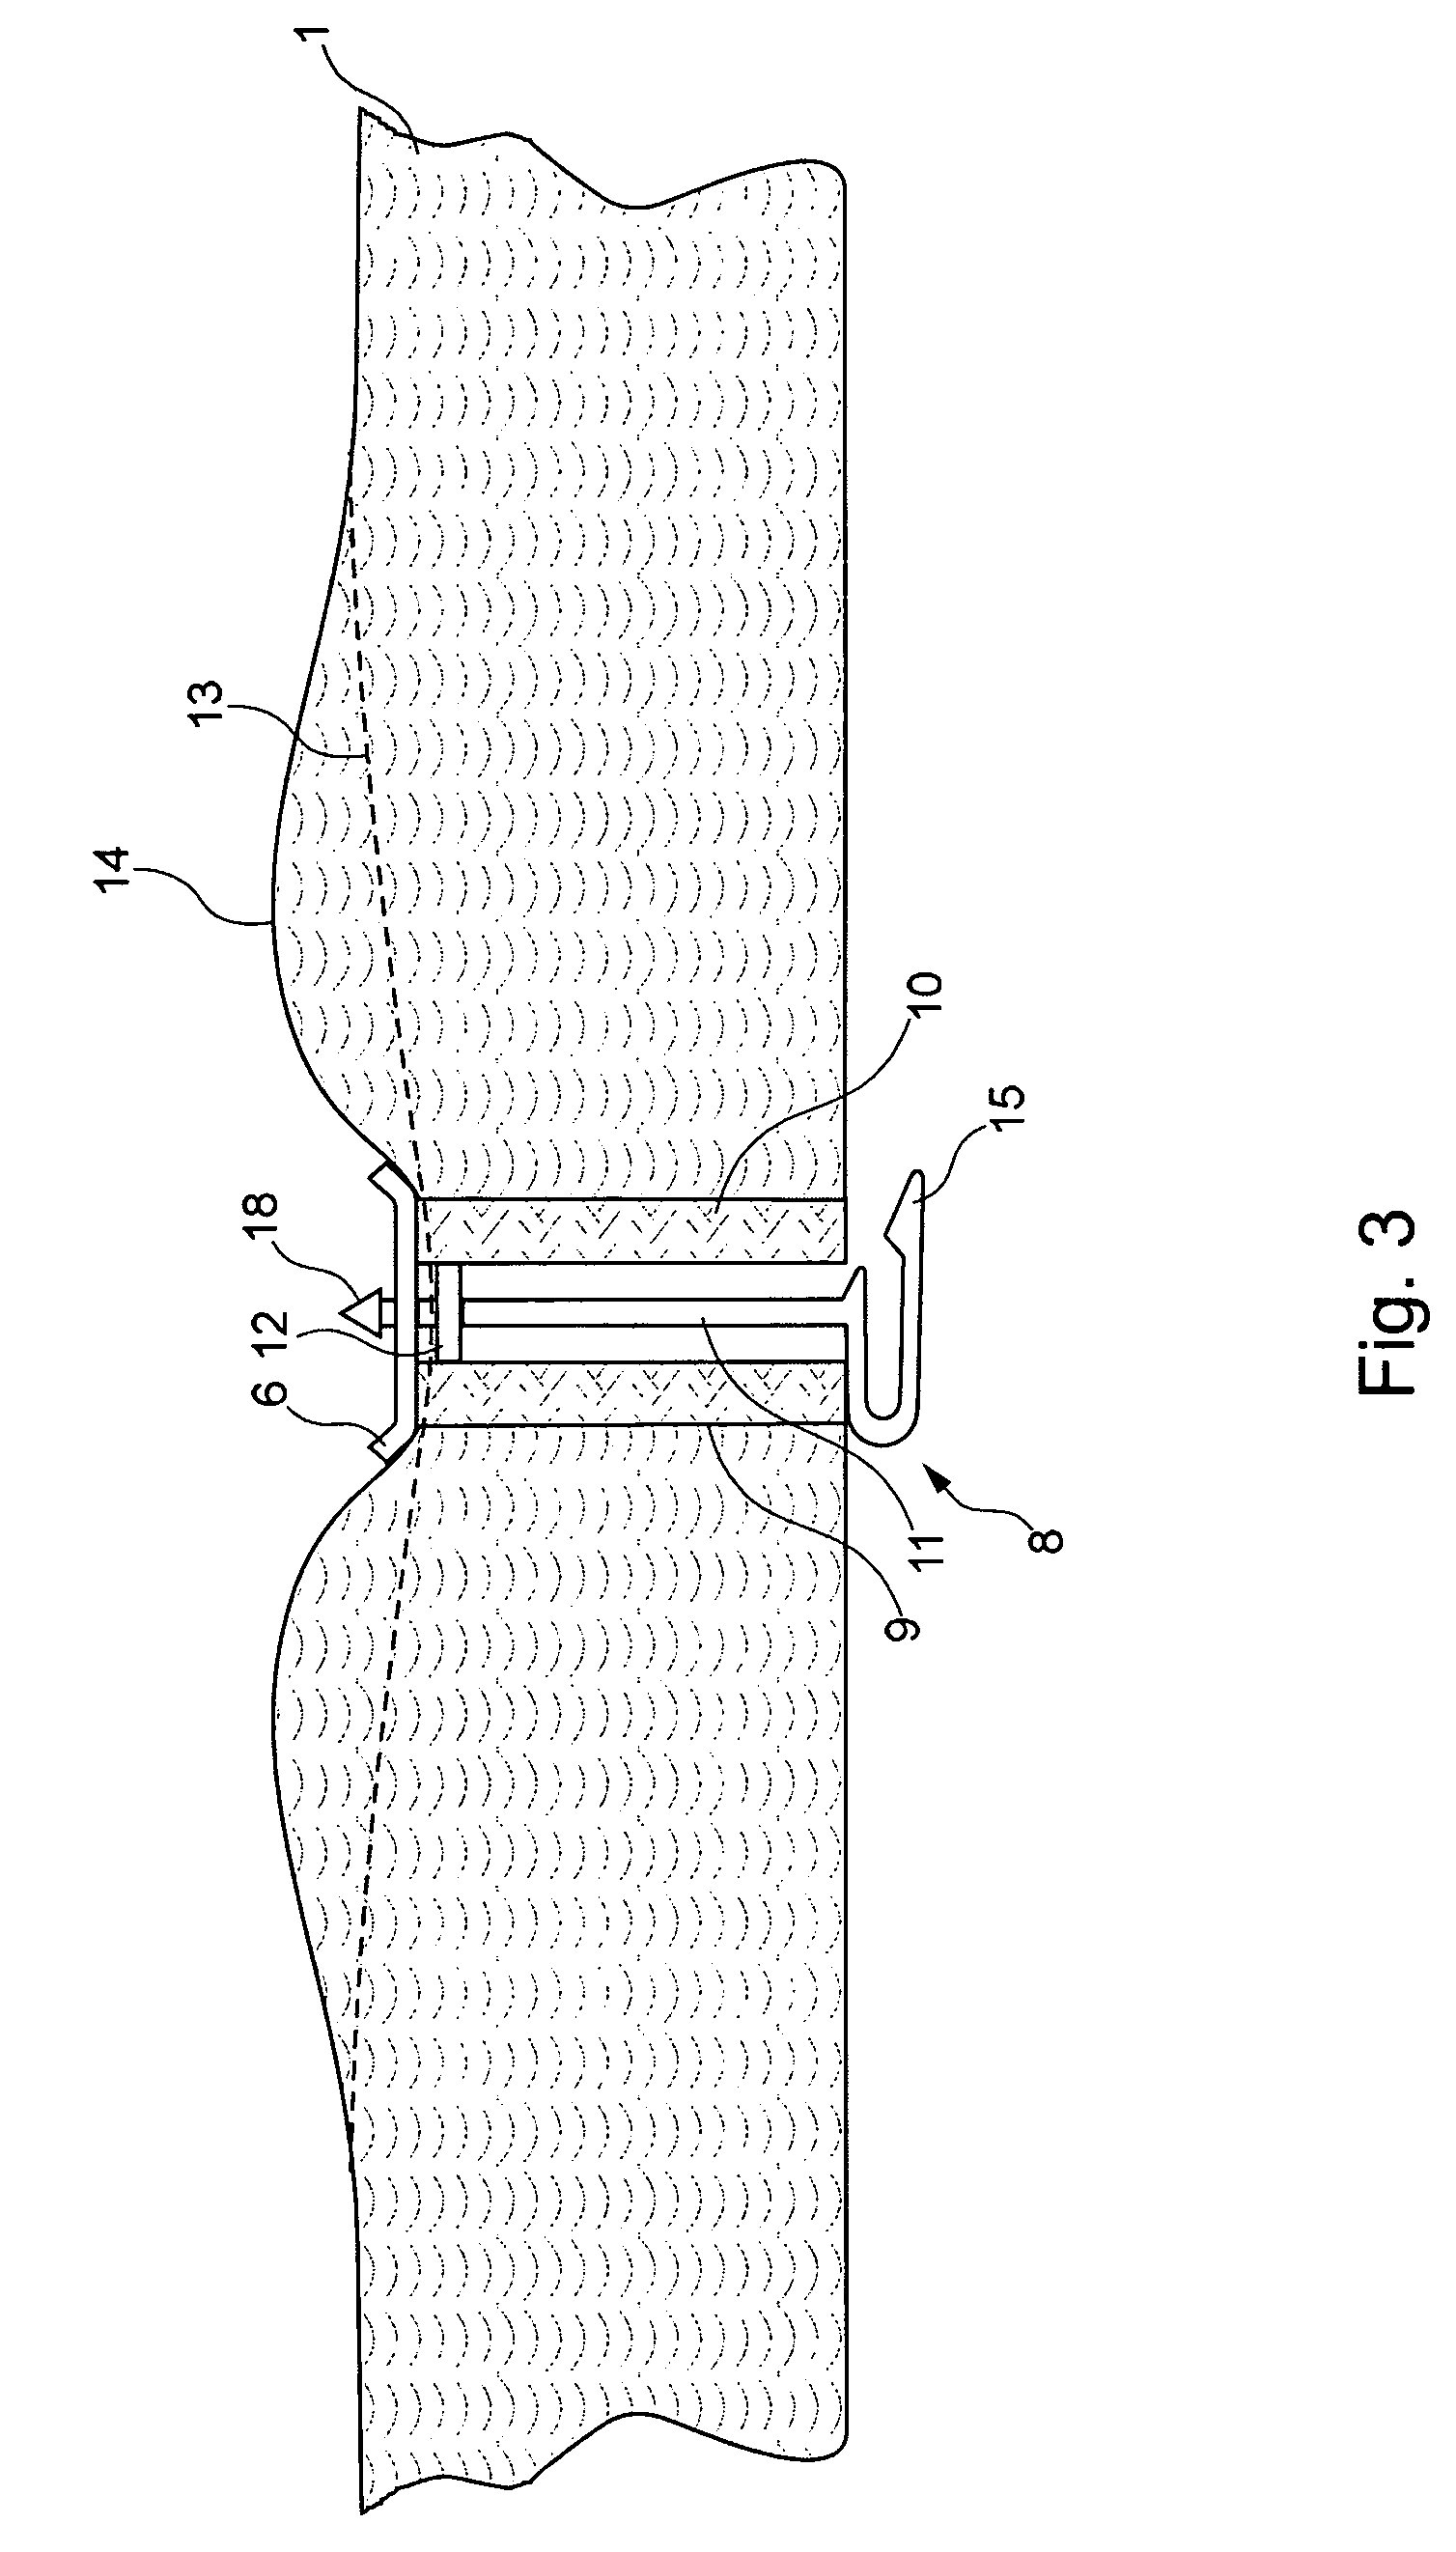 Insulation of an aircraft fuselage structure